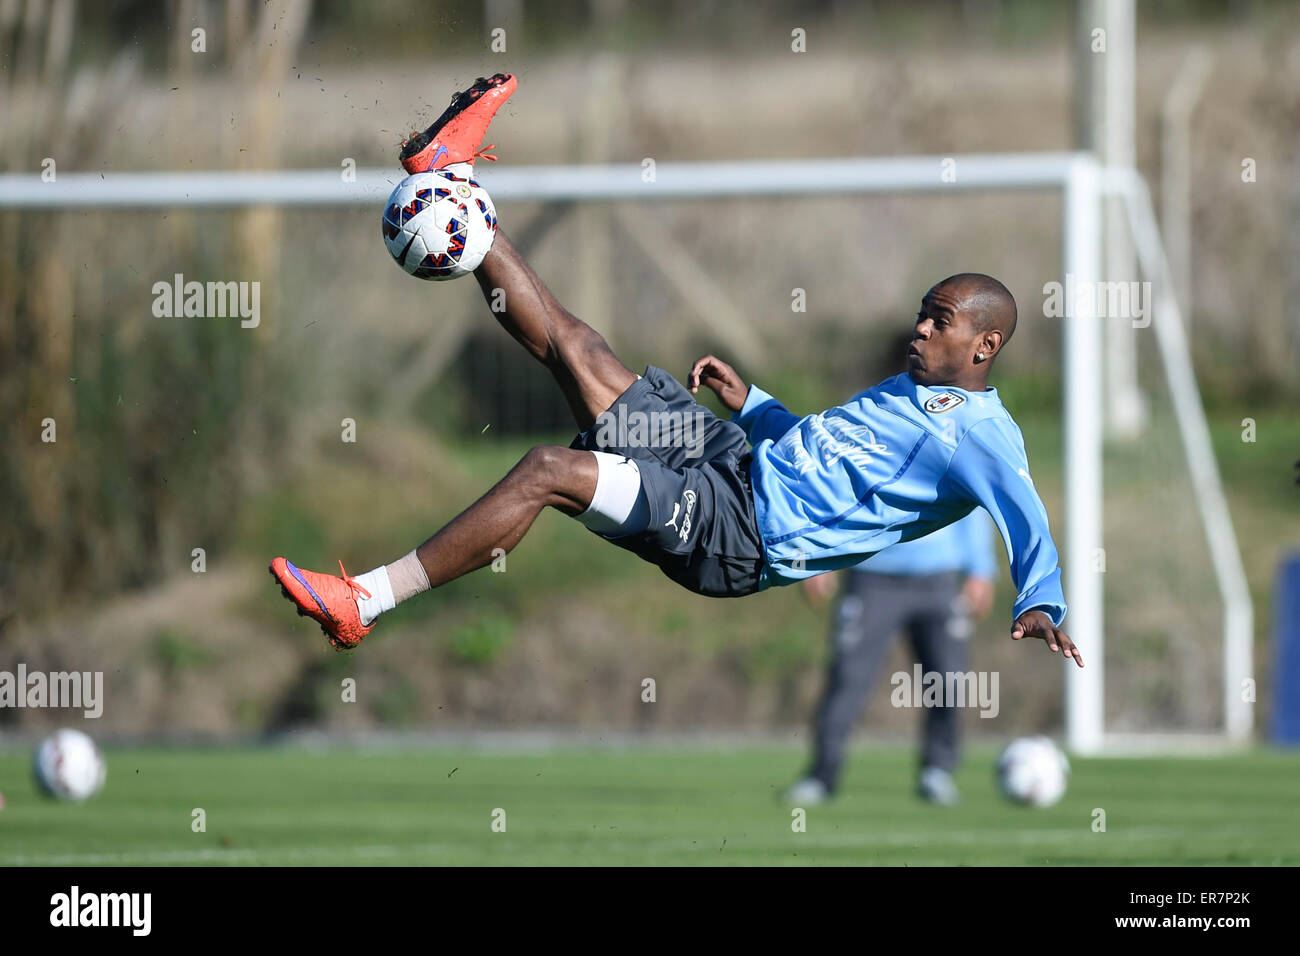 Canelones, Uruguay. 28th May, 2015. Uruguayan National Football Team player Diego Rolan takes part in a training session, at Uruguay Celeste sports complex, in Canelones, 30km from Montevideo, capital of Uruguay, on May 28, 2015. Uruguayan National Football Team prepared to take part in the Copa America 2015, to be held from June 11 to July 4 in Chile. © Nicolas Celaya/Xinhua/Alamy Live News Stock Photo